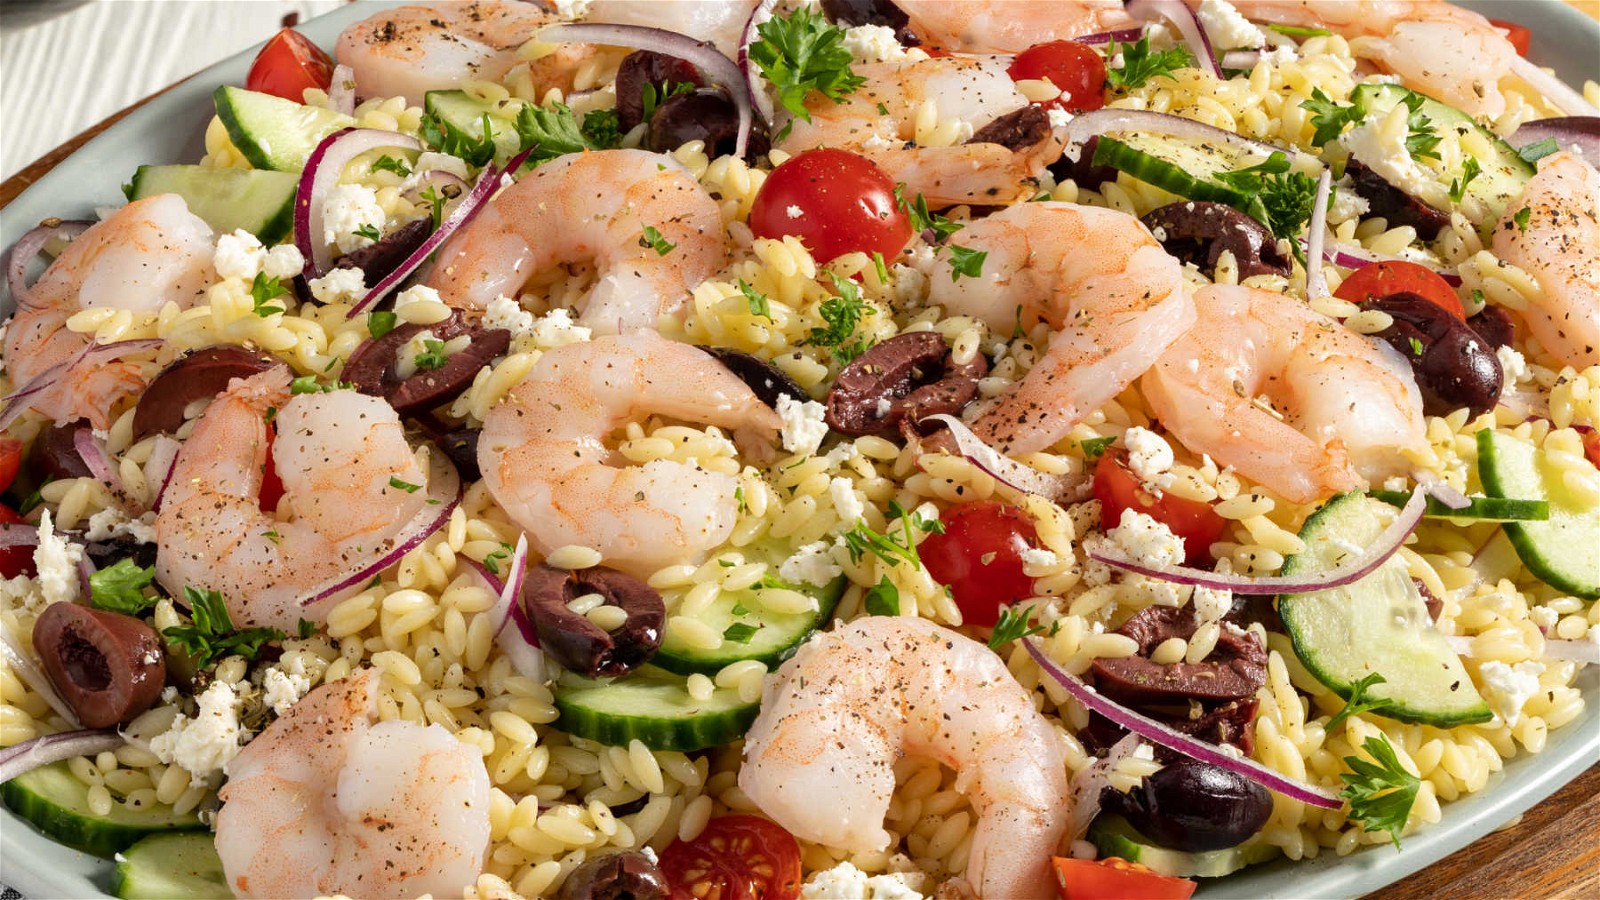 Image of Mediterranean Orzo Salad with Shrimp